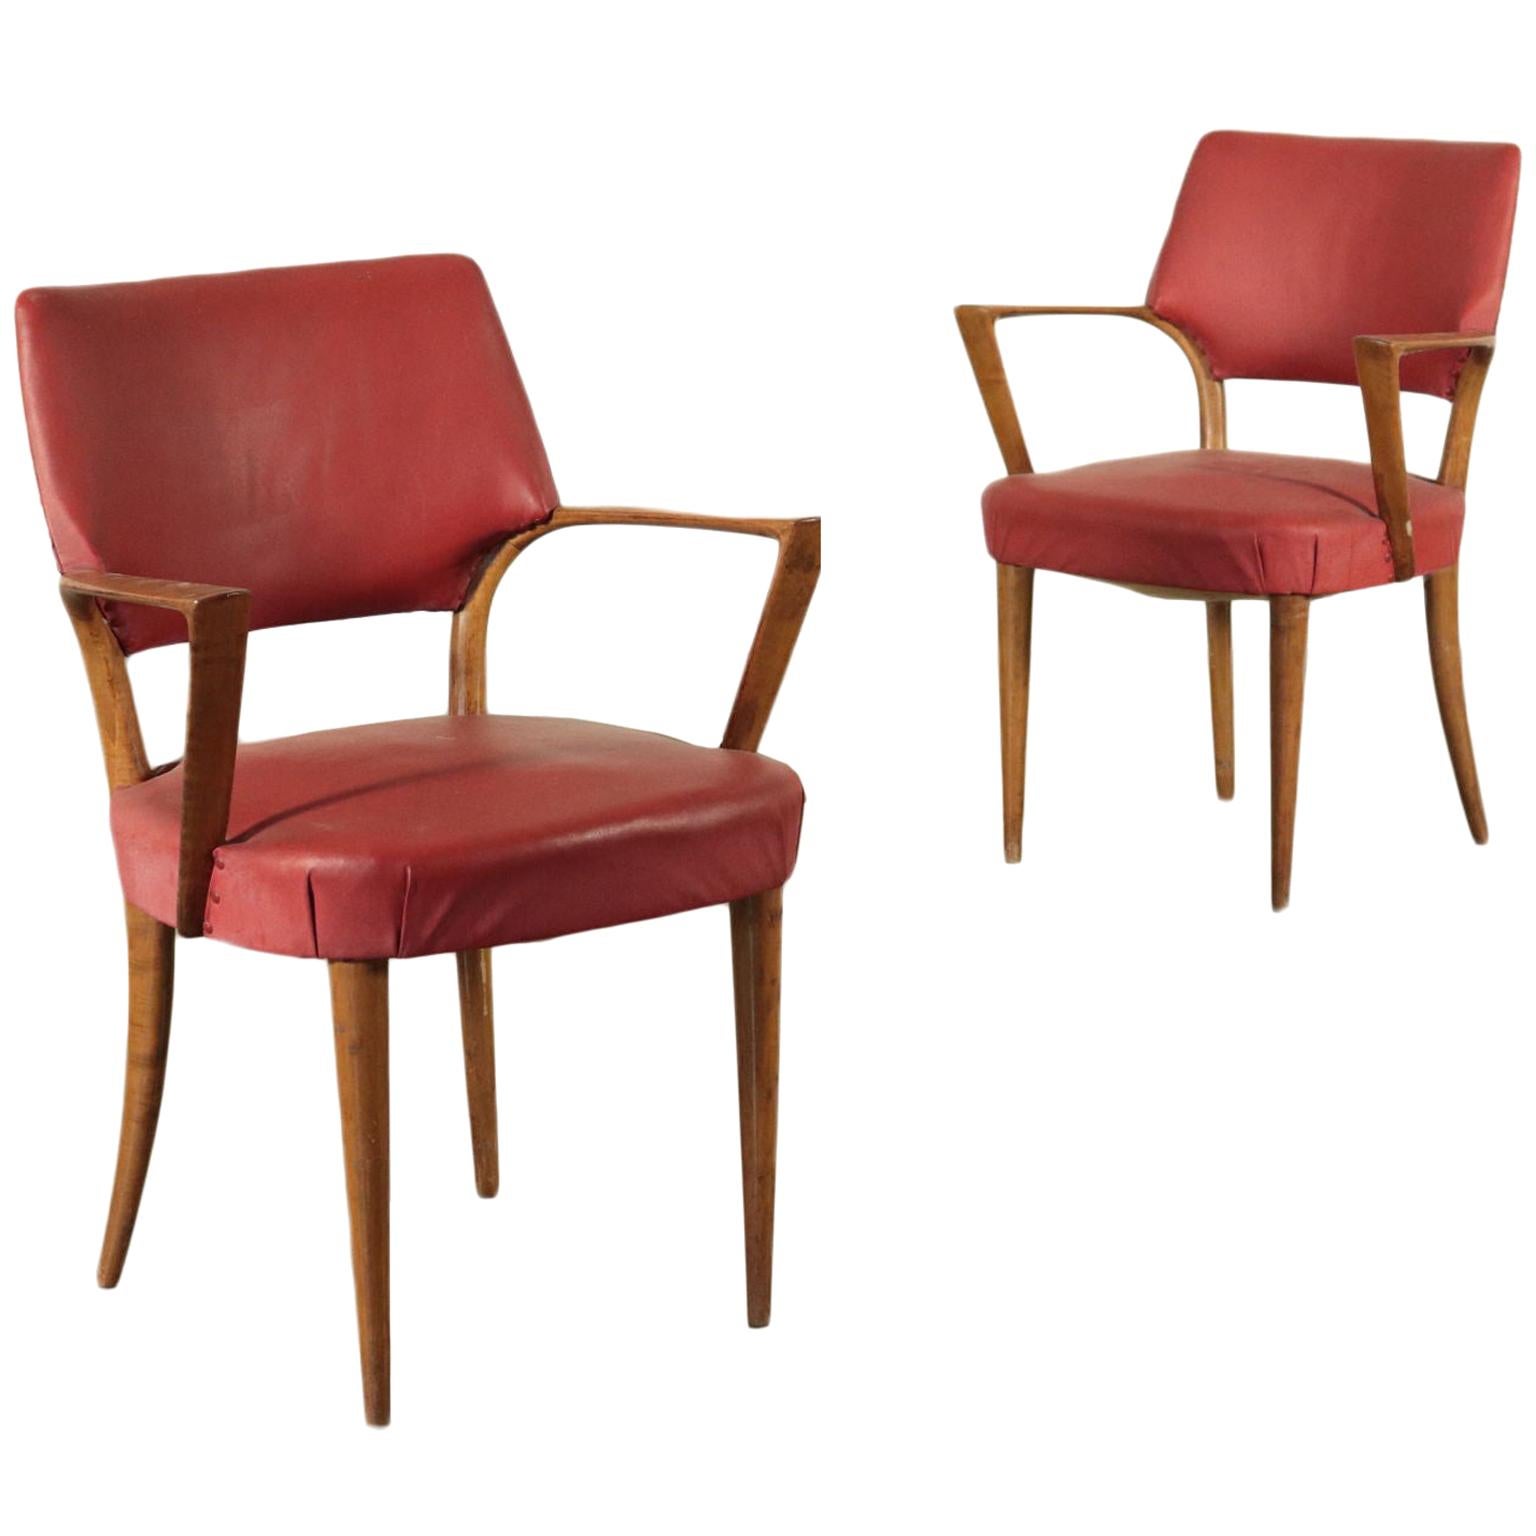 Armchairs, Beech Spring and Leatherette, Italy, 1950s